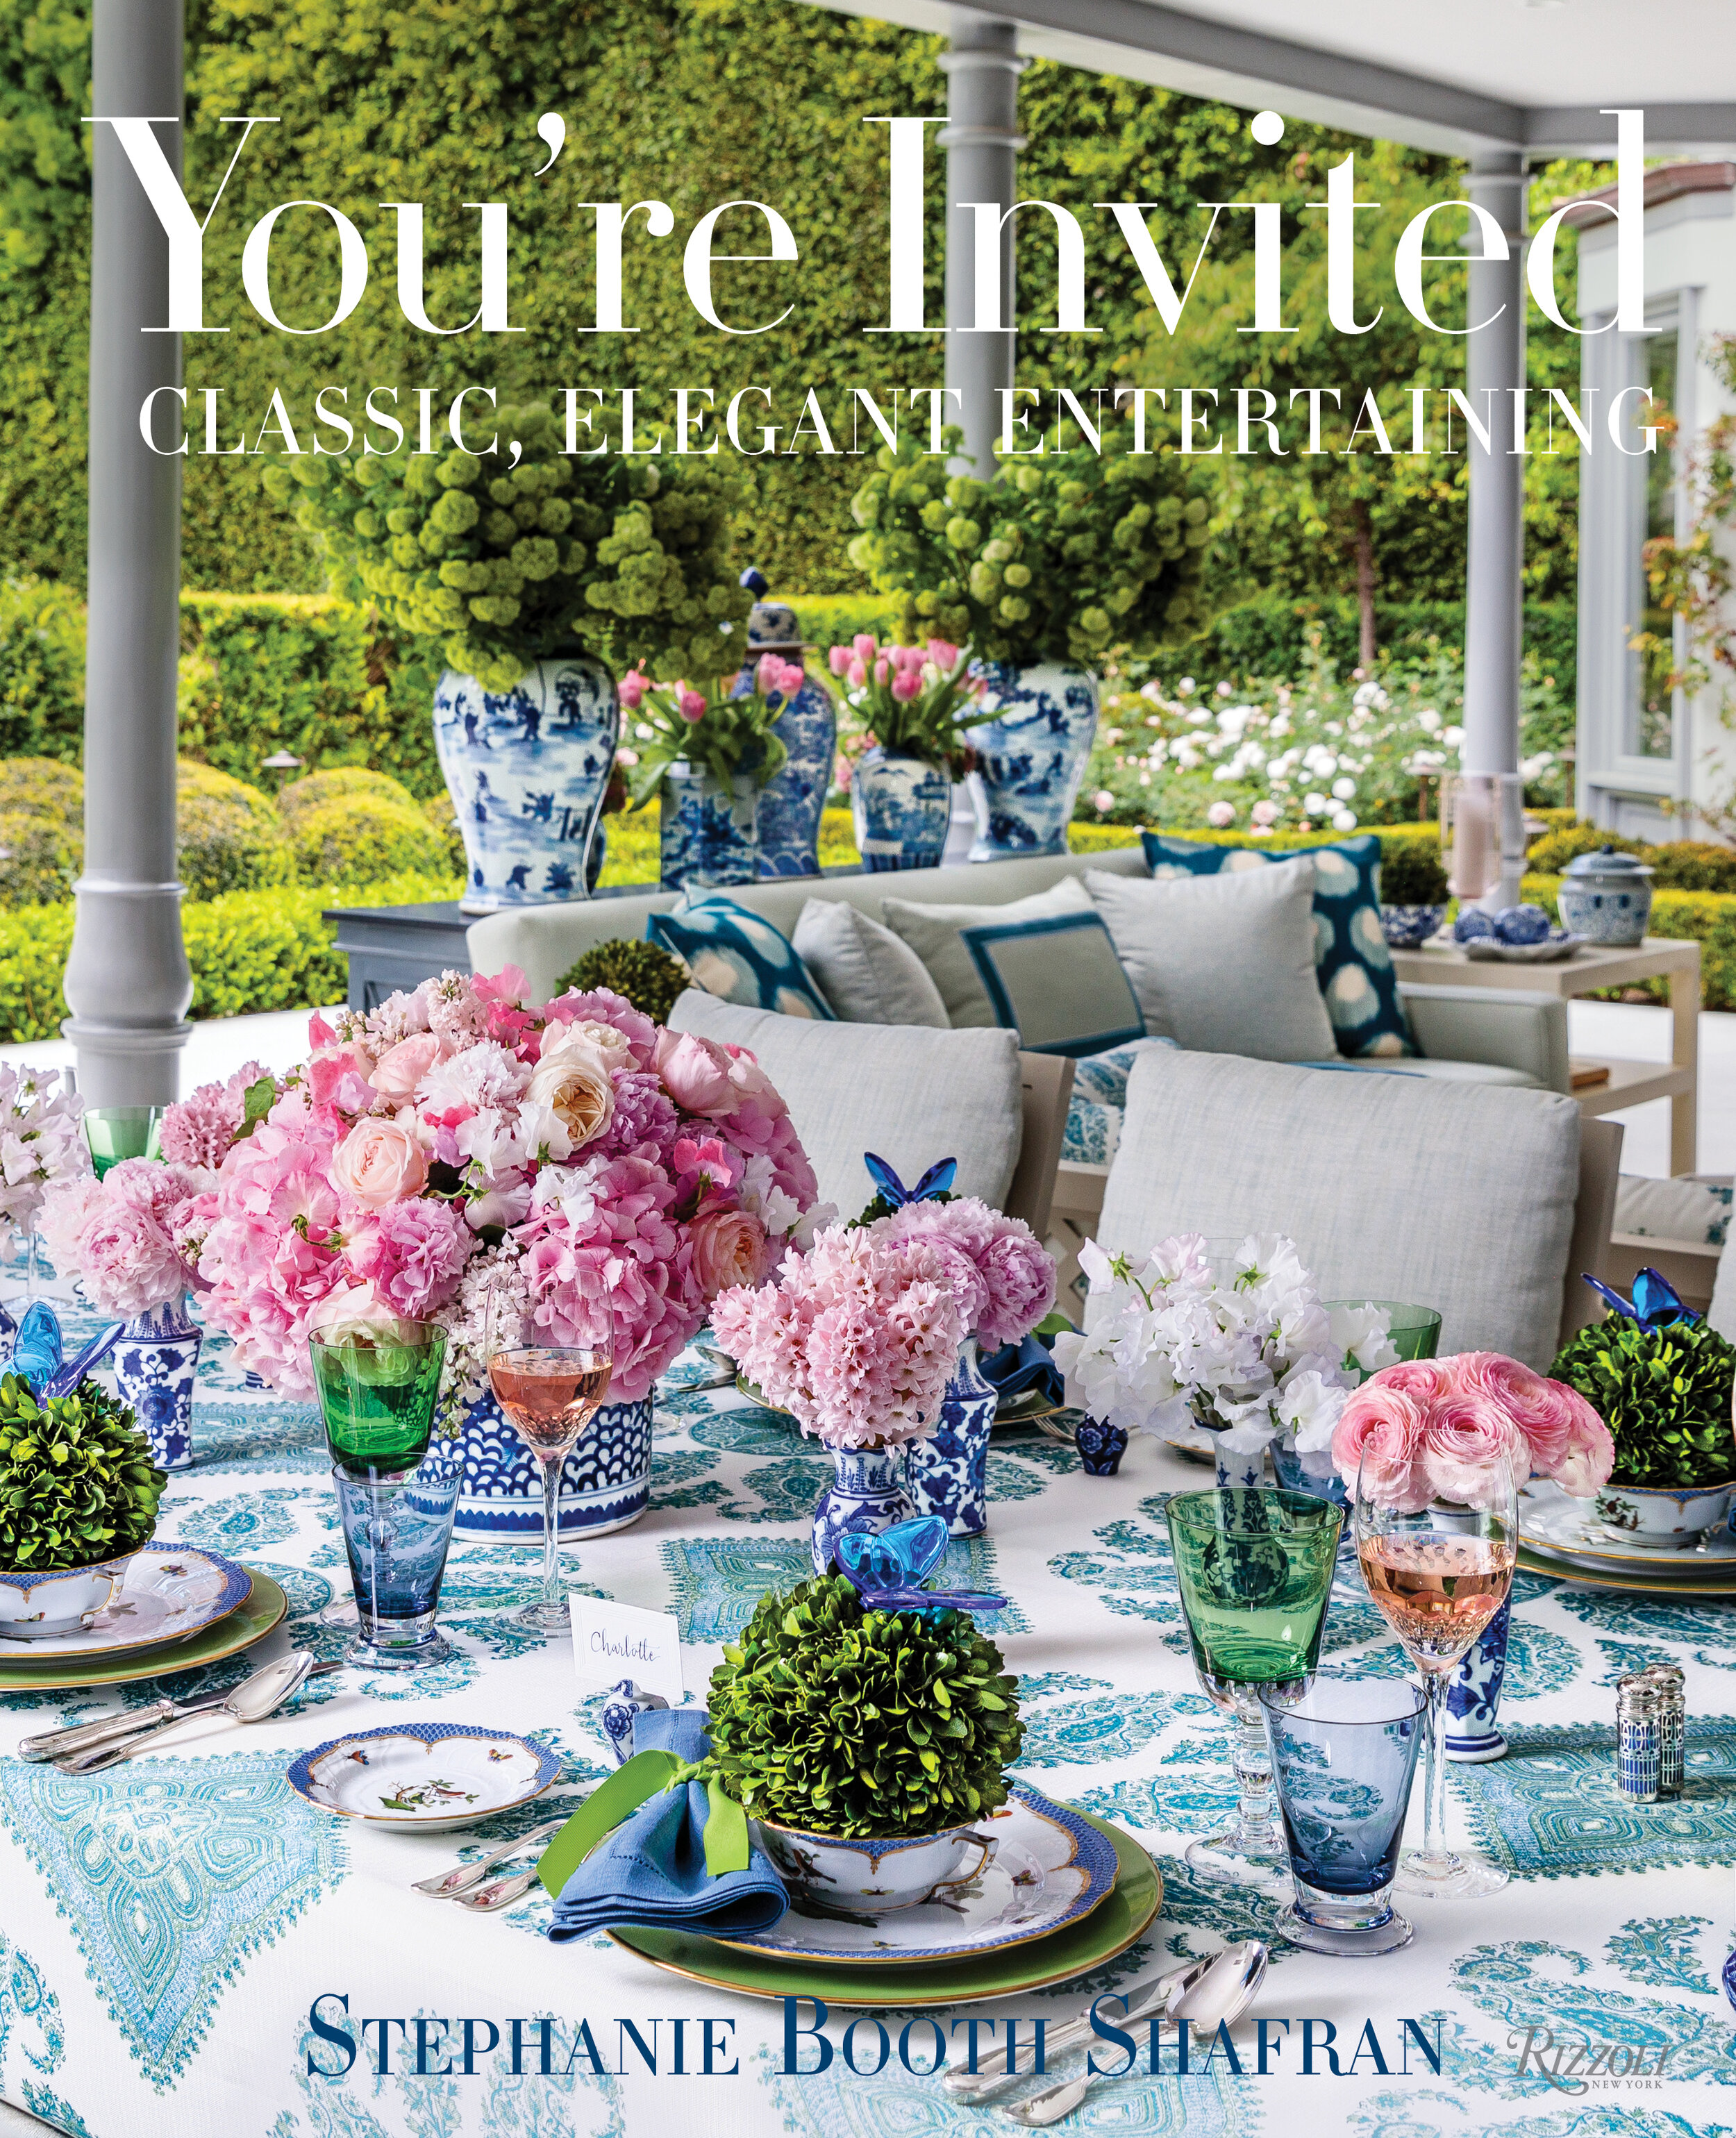 Taking at-home entertaining to an entirely new level, sophisticated L.A. hostess Stephanie Booth Shafran--recently named by the Salonniere as one of the top hostesses in Los Angeles--has a gift for celebration. From the table settings to the decor t…